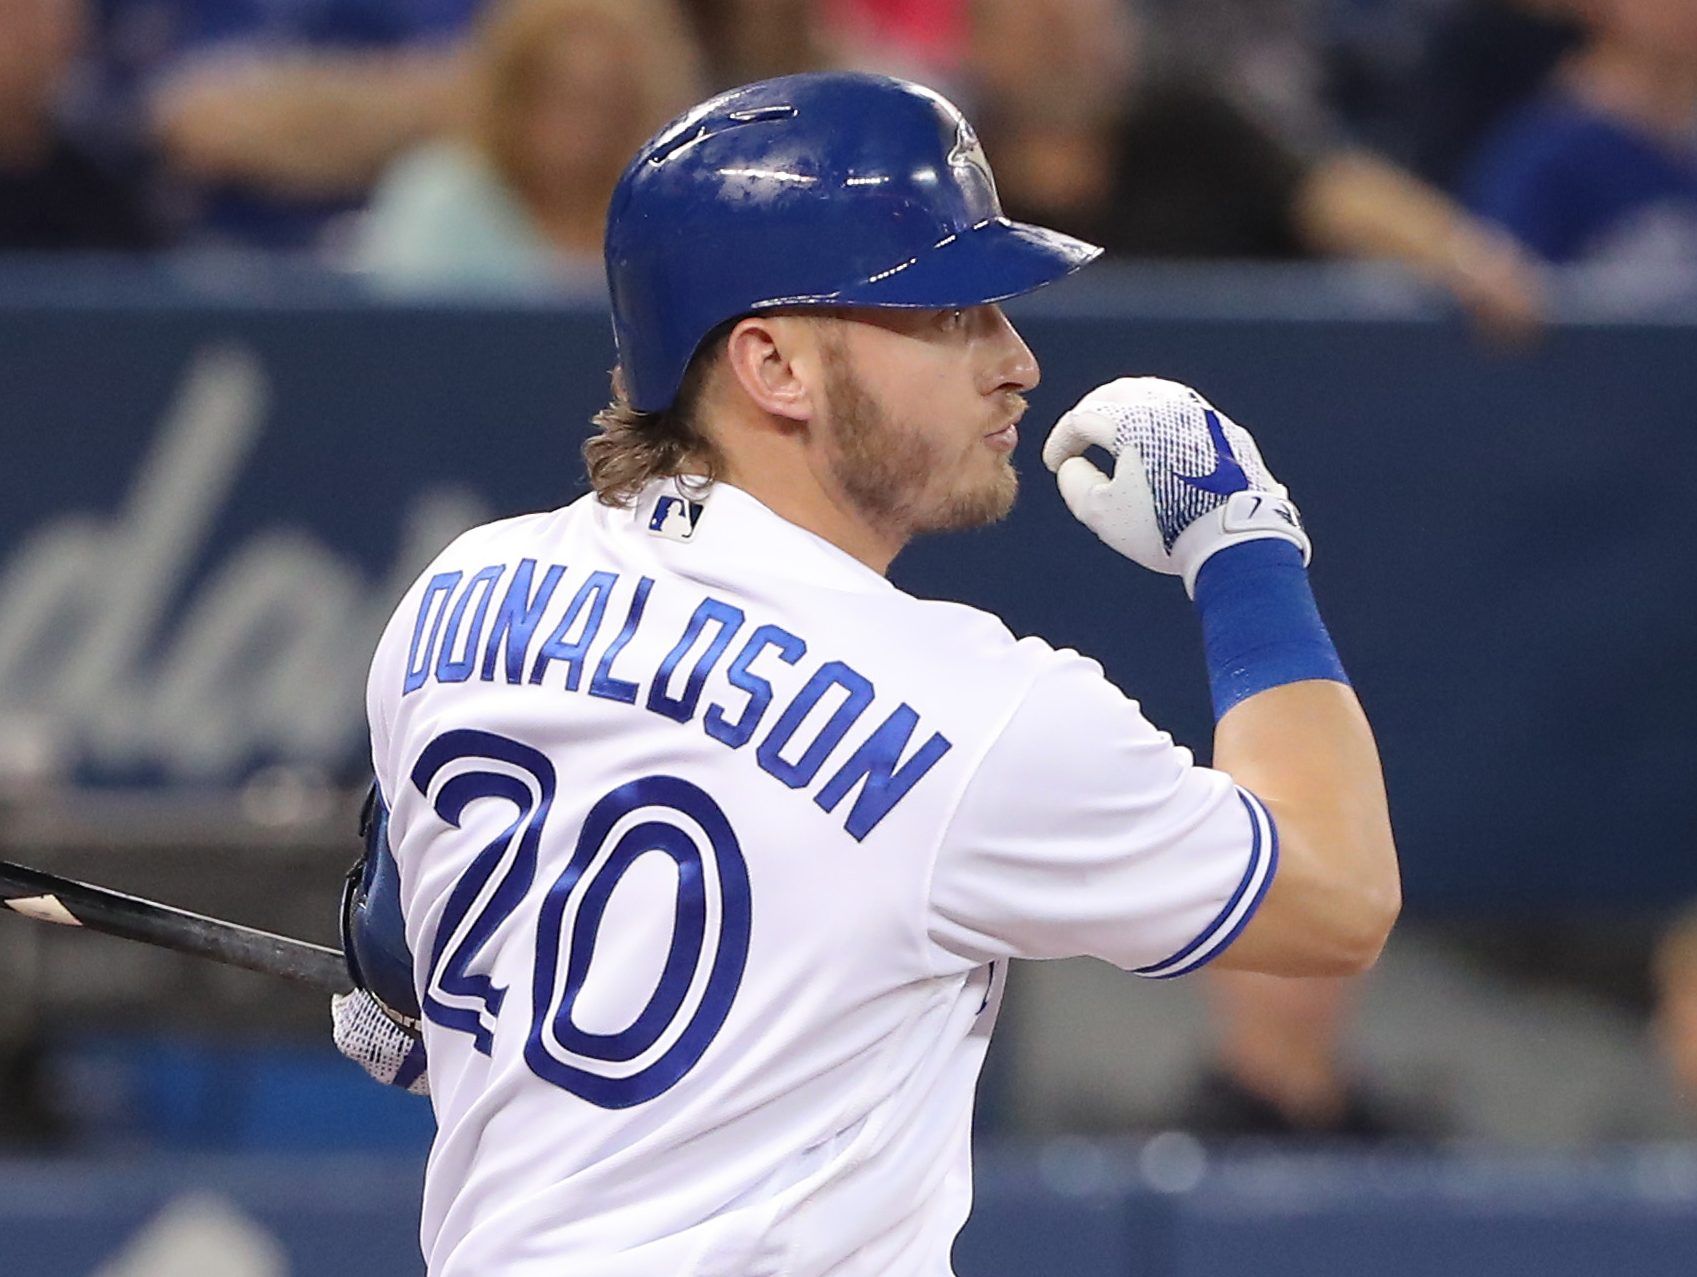 Blue Jays star Josh Donaldson gets new look after run-in with